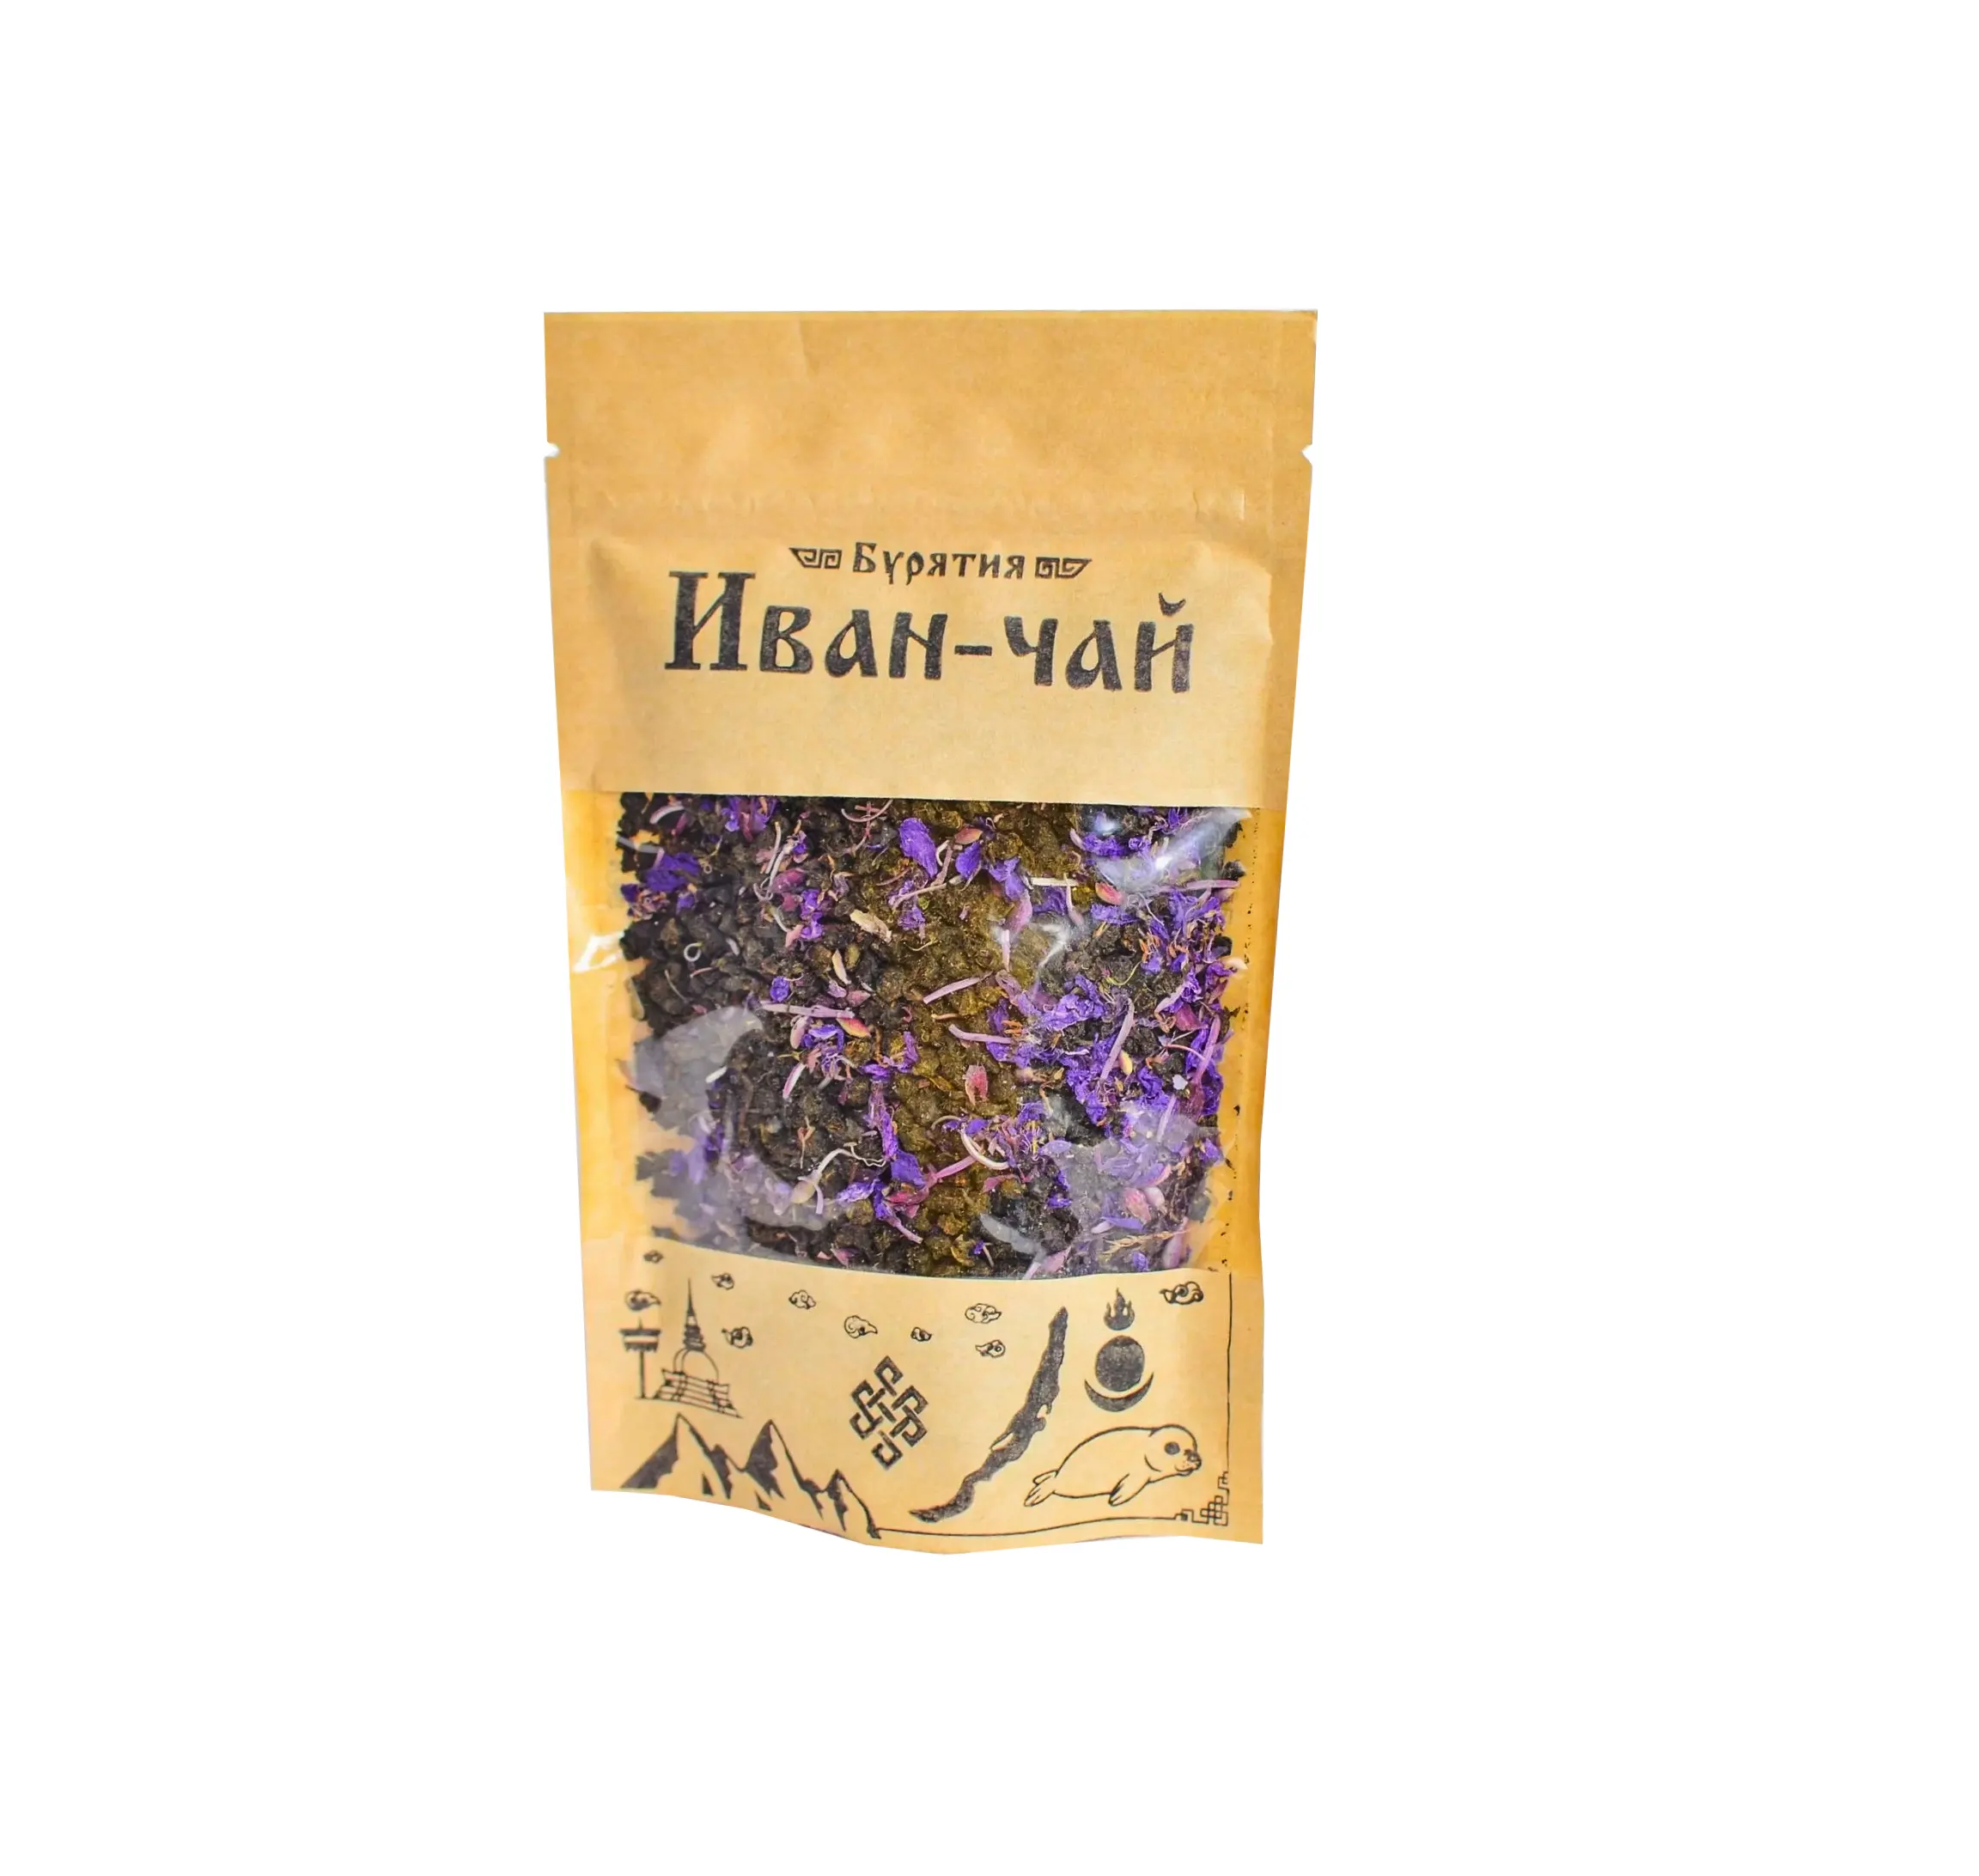 Fireweed Tea Herbal Leaf Tea In Doypack Willow-Herb Granular Tea Variety With Natural Additives Berries